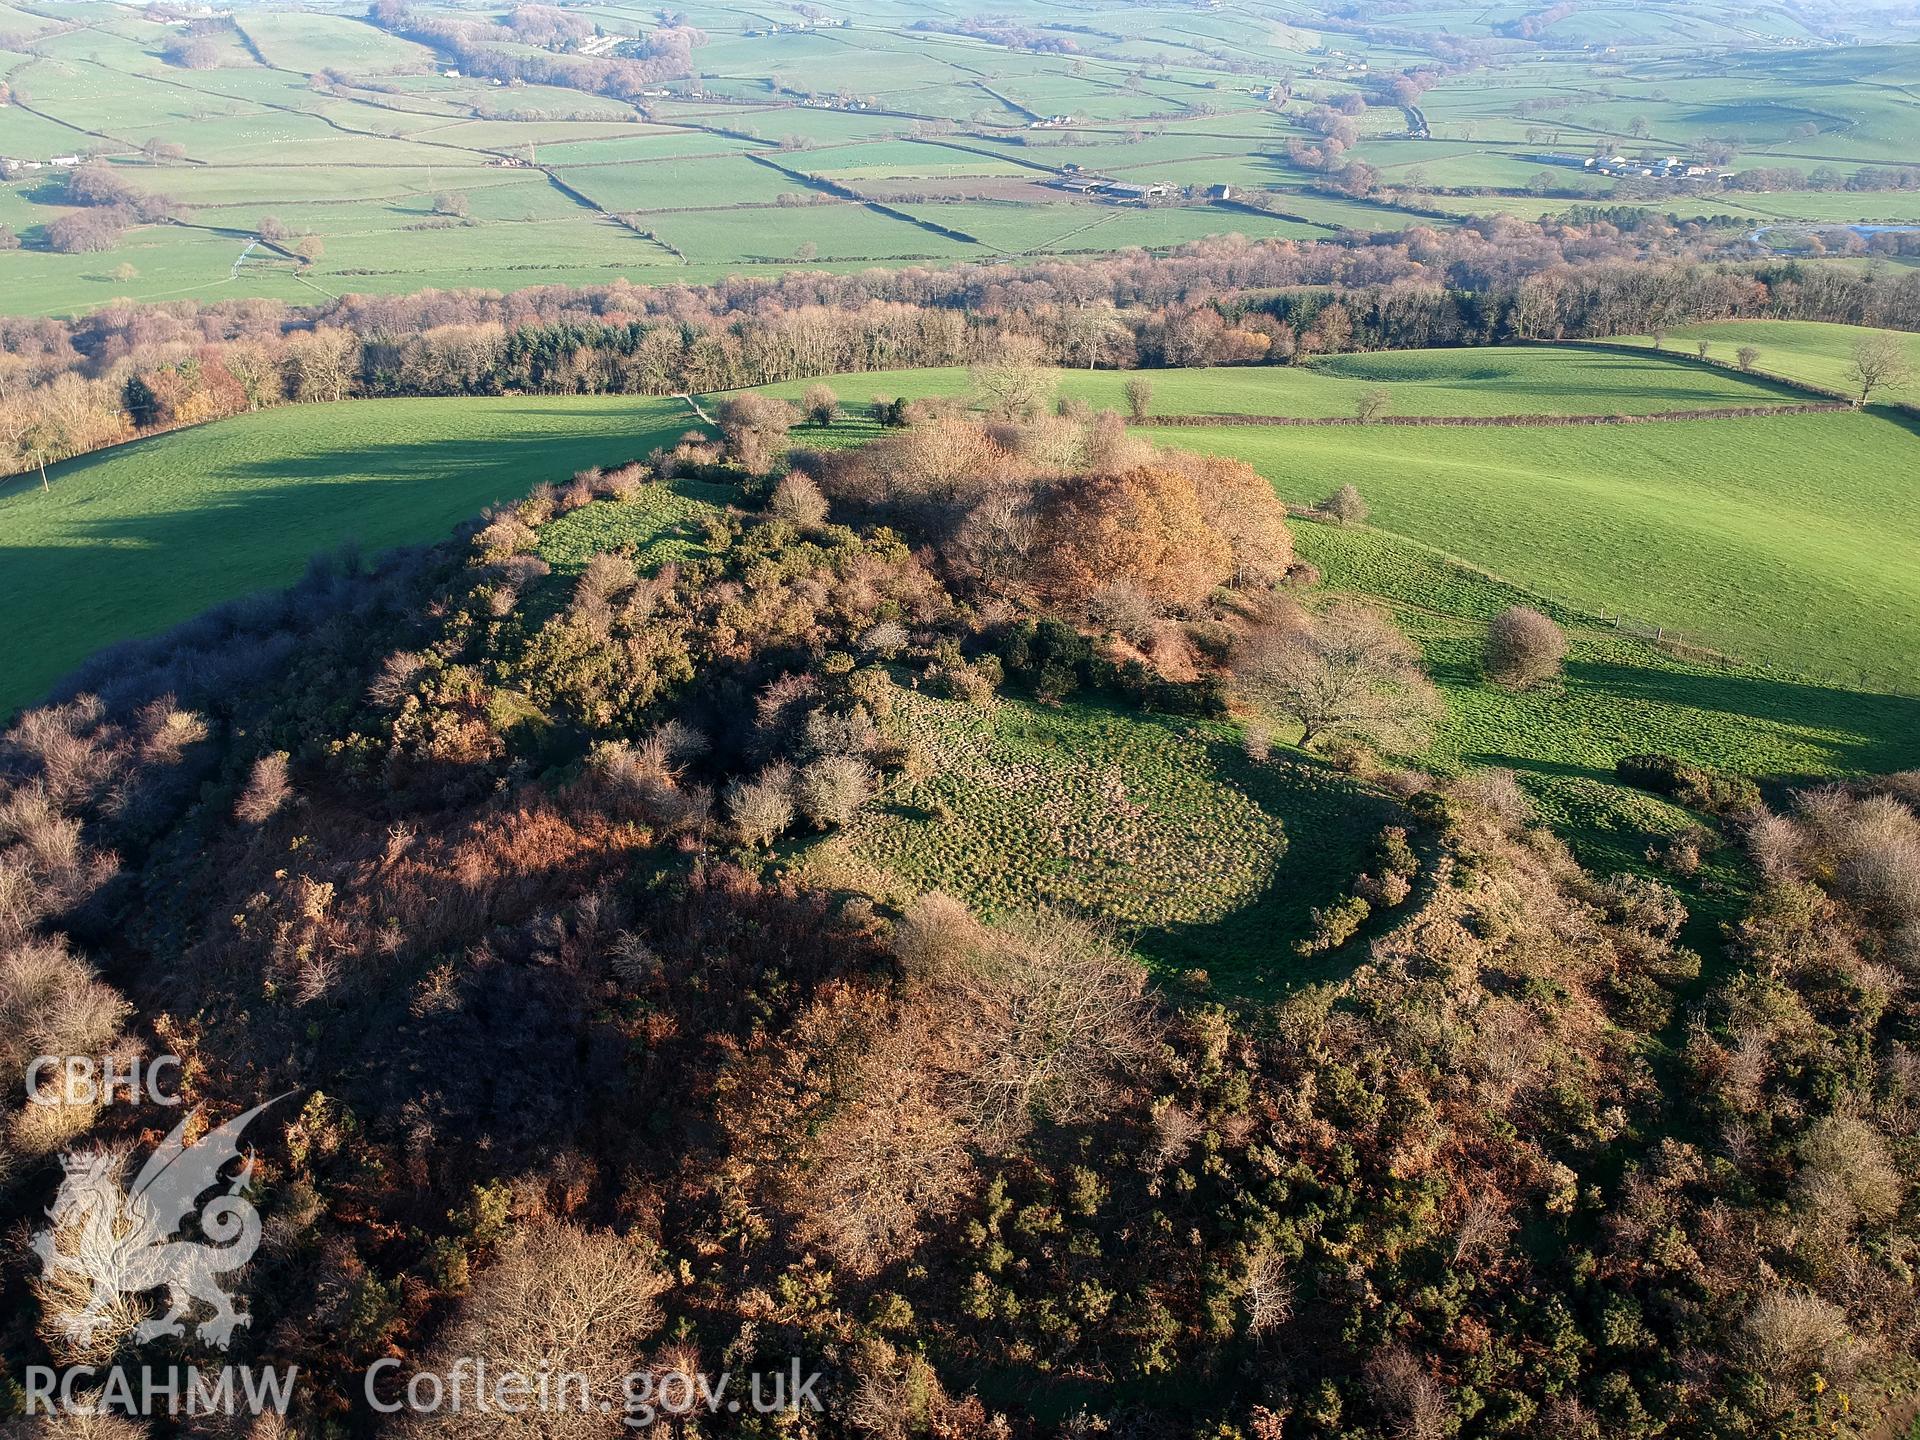 Aerial view of Pen-y-Castell hillfort, near Castle Hill, Llanilar. Colour photograph taken by Paul R. Davis on 18th November 2018.